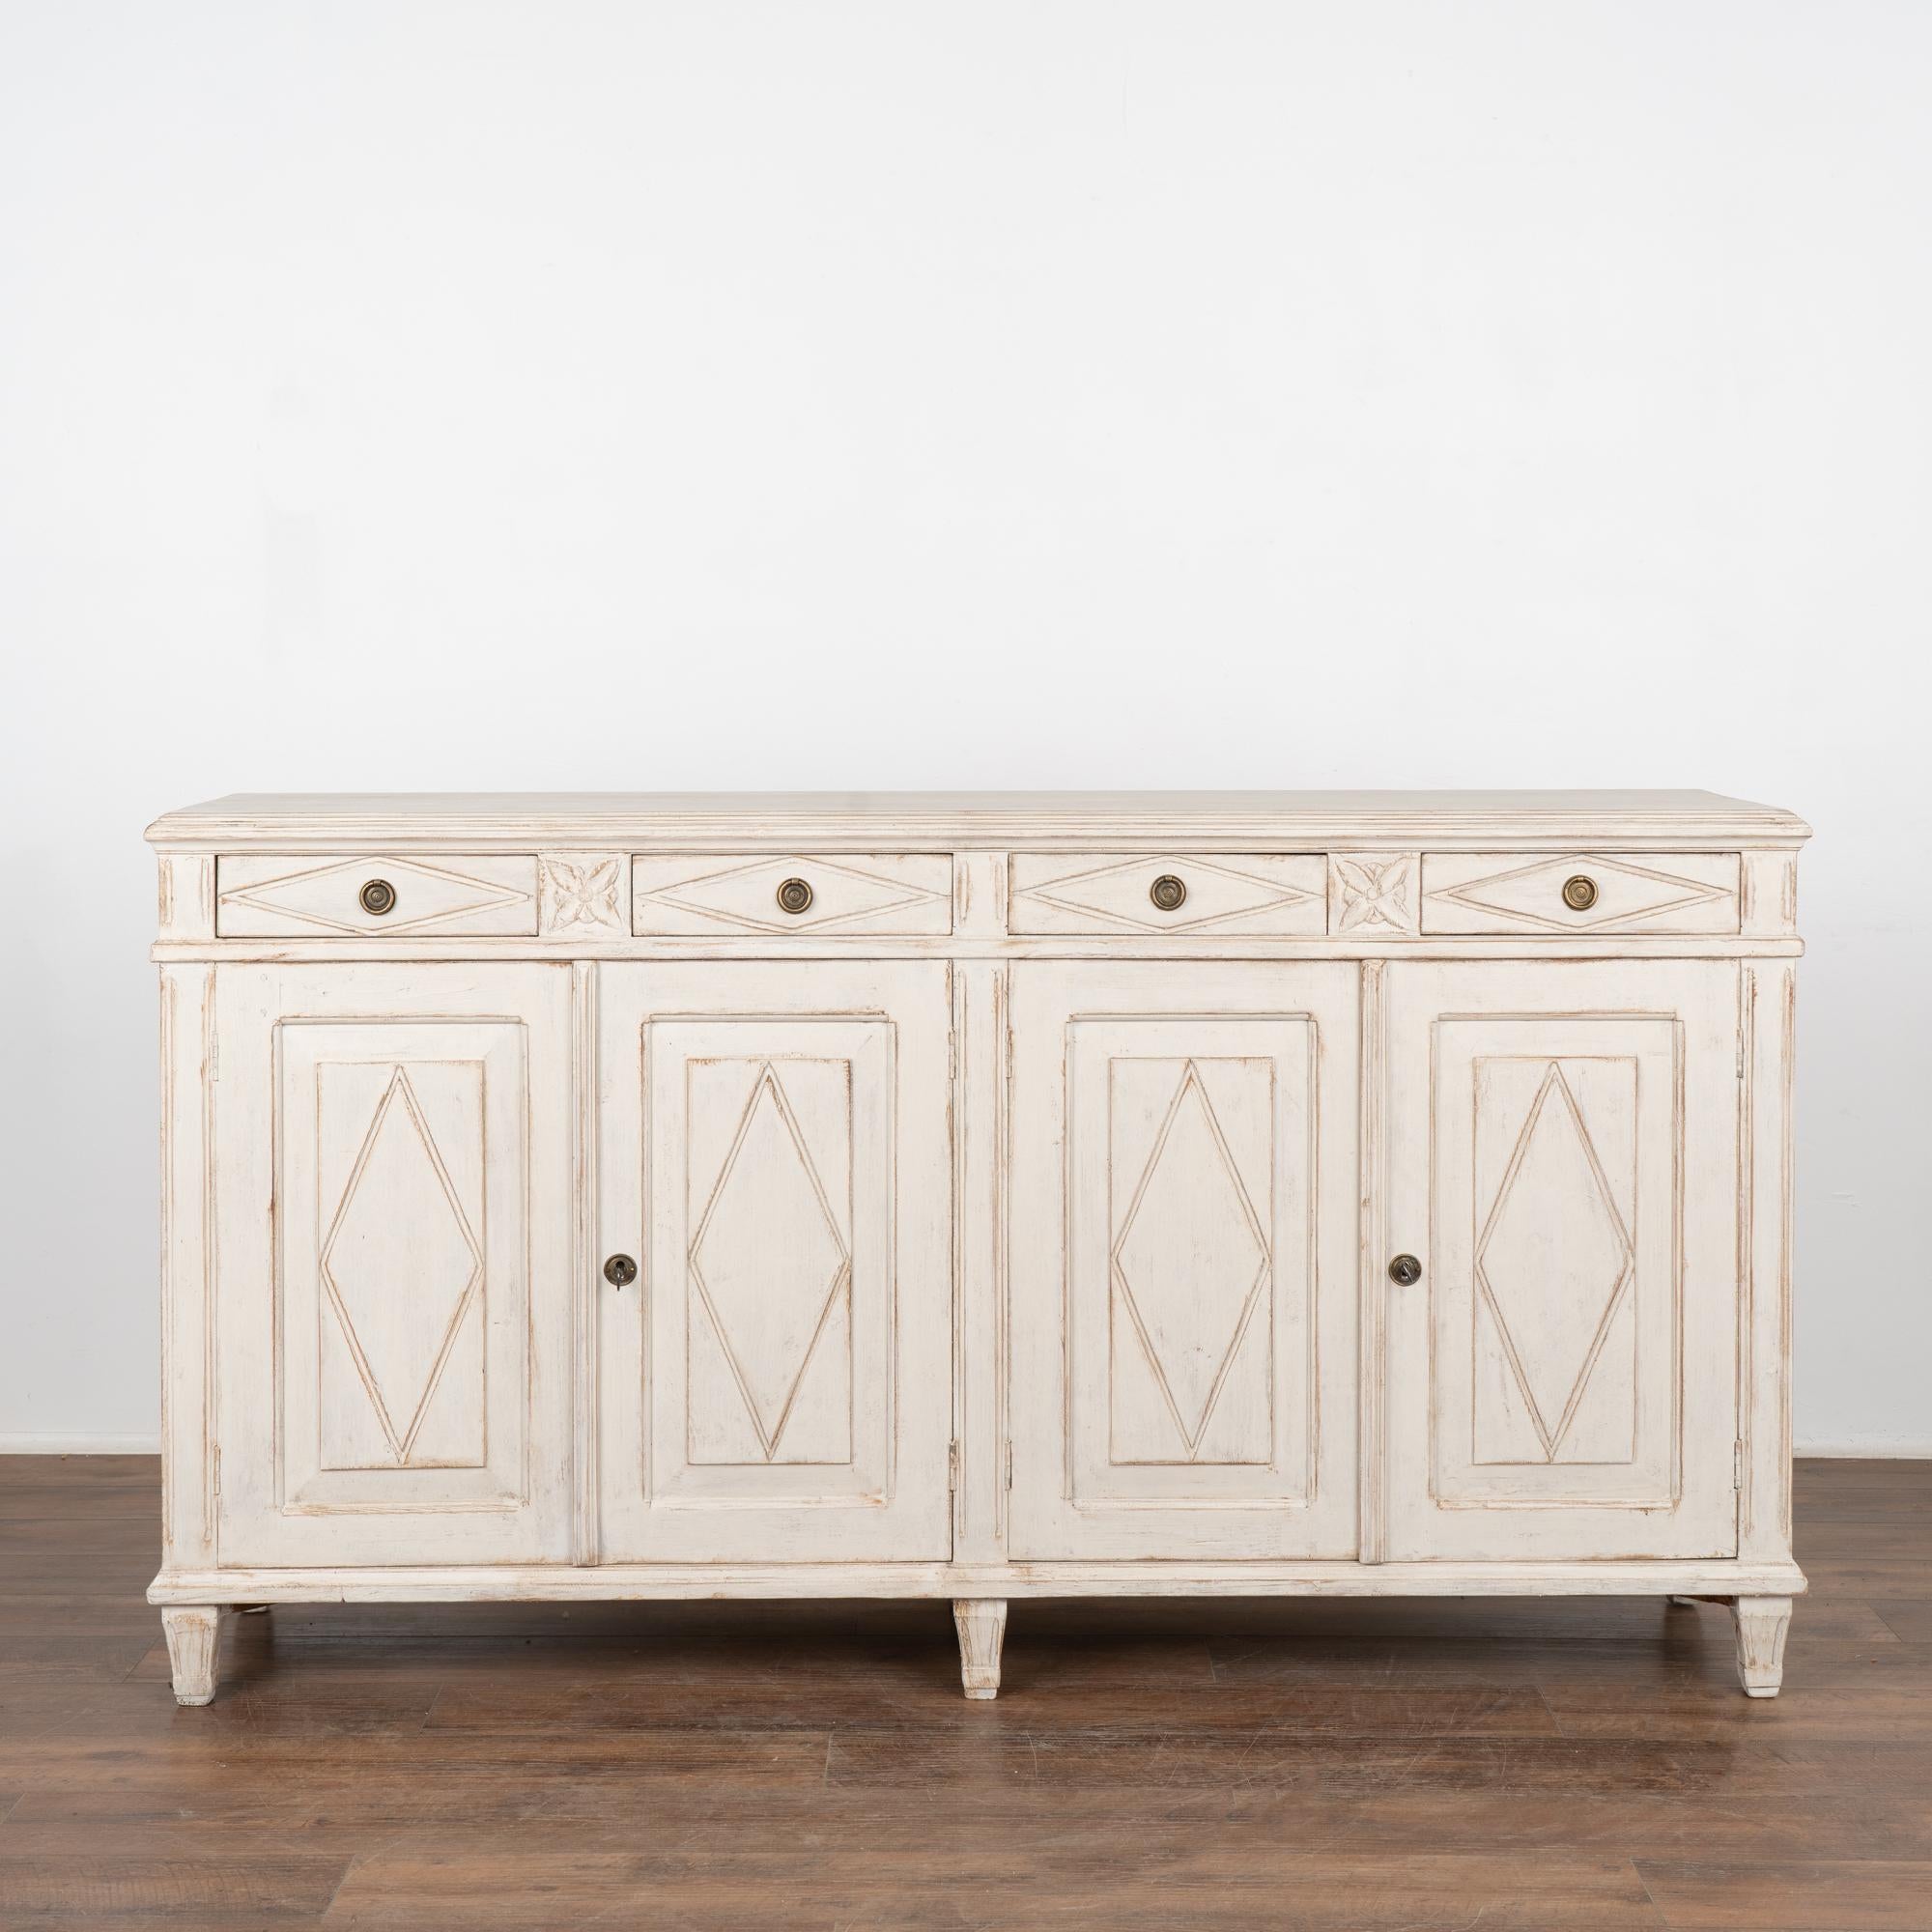 Swedish White Painted Pine Sideboard, Sweden circa 1900's For Sale